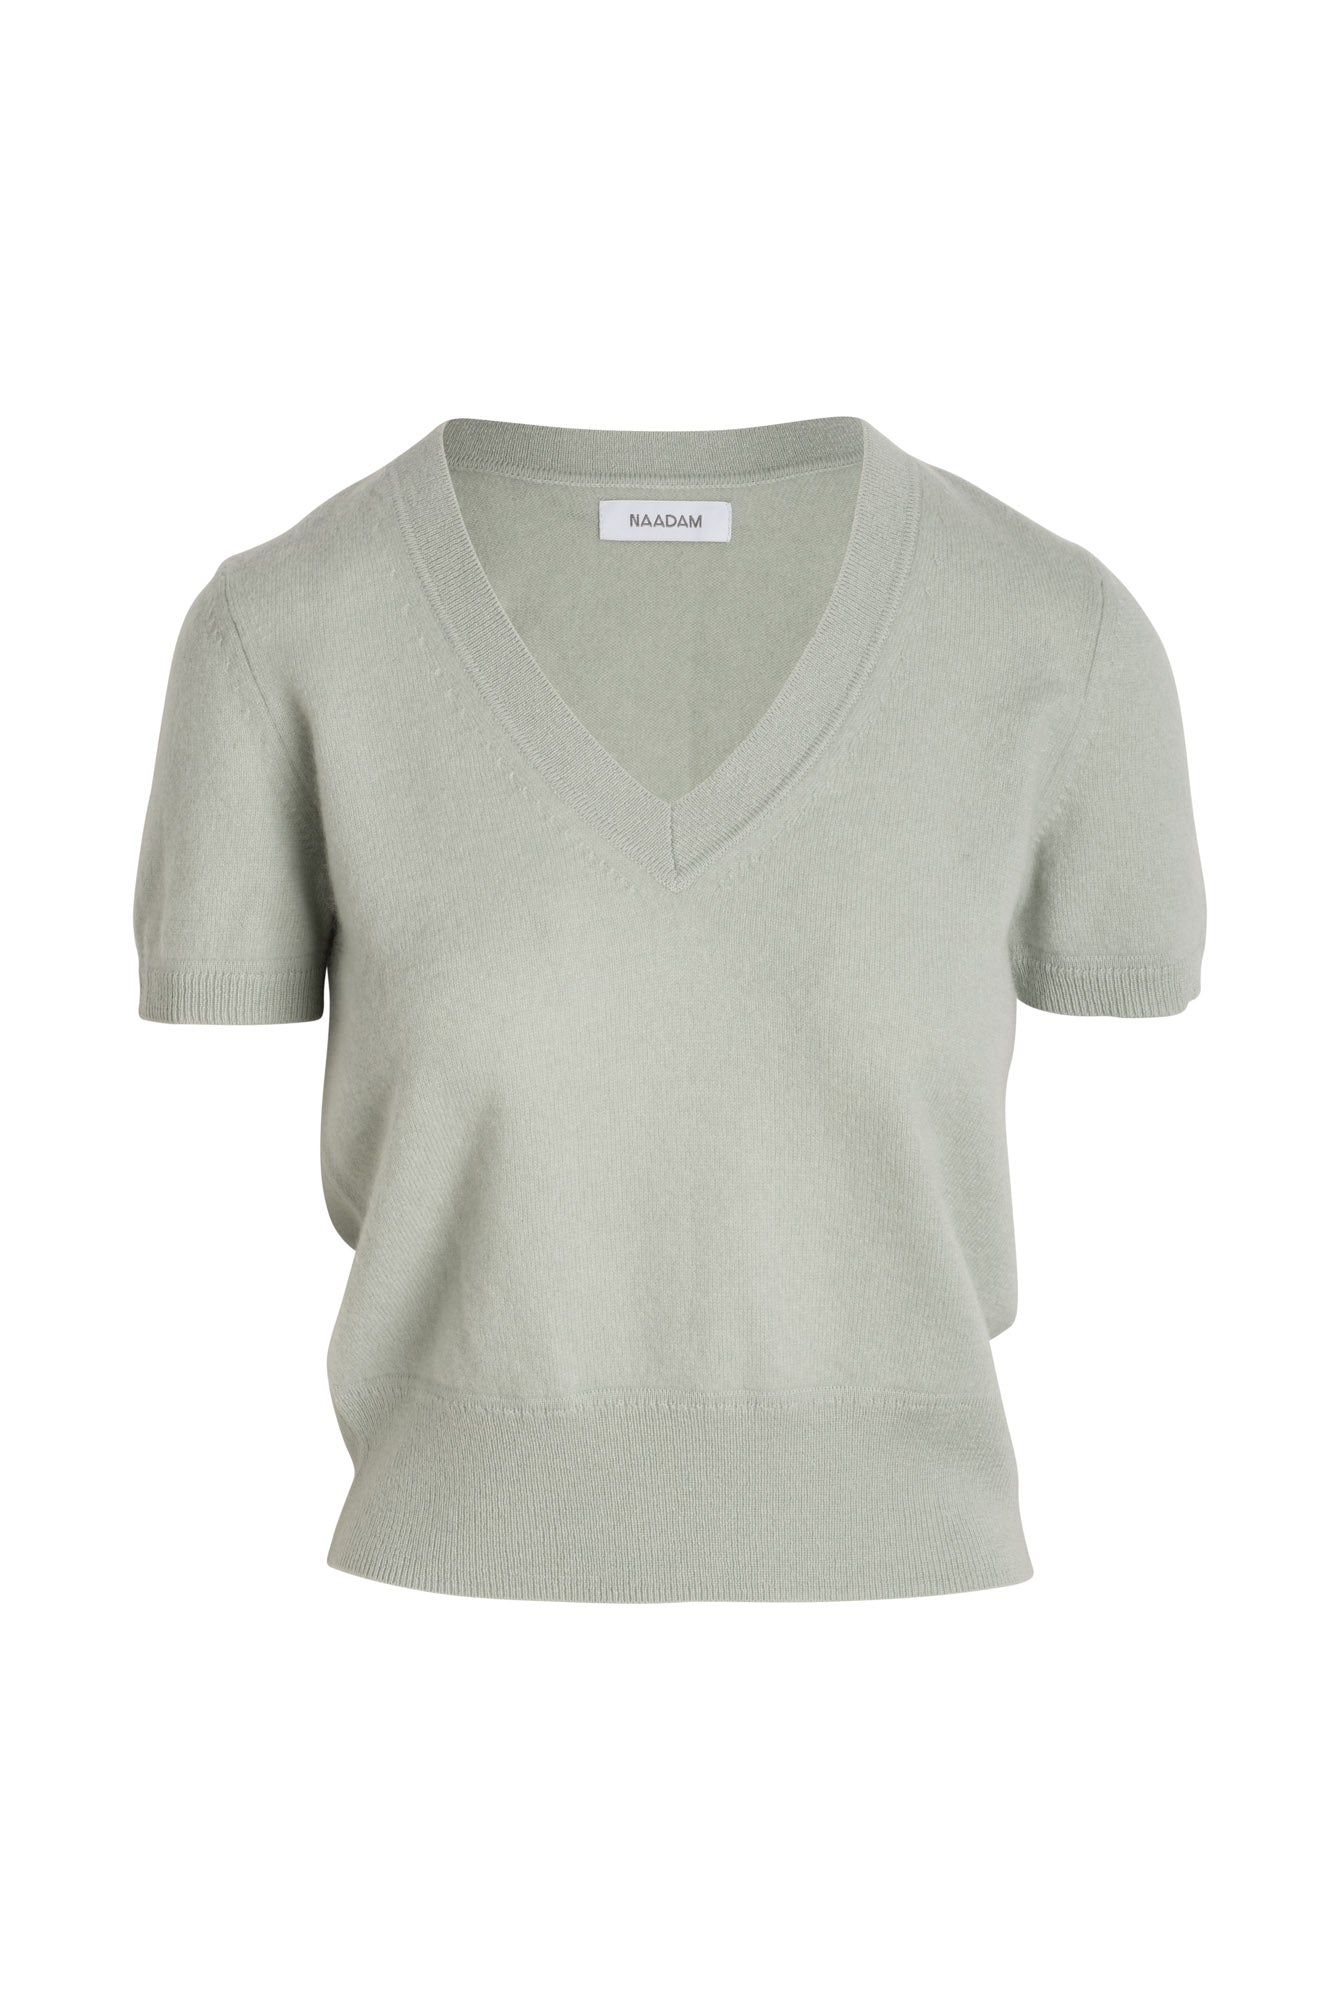 Naadam - Cashmere Short Sleeve Cropped V-Neck Pullover in Mint